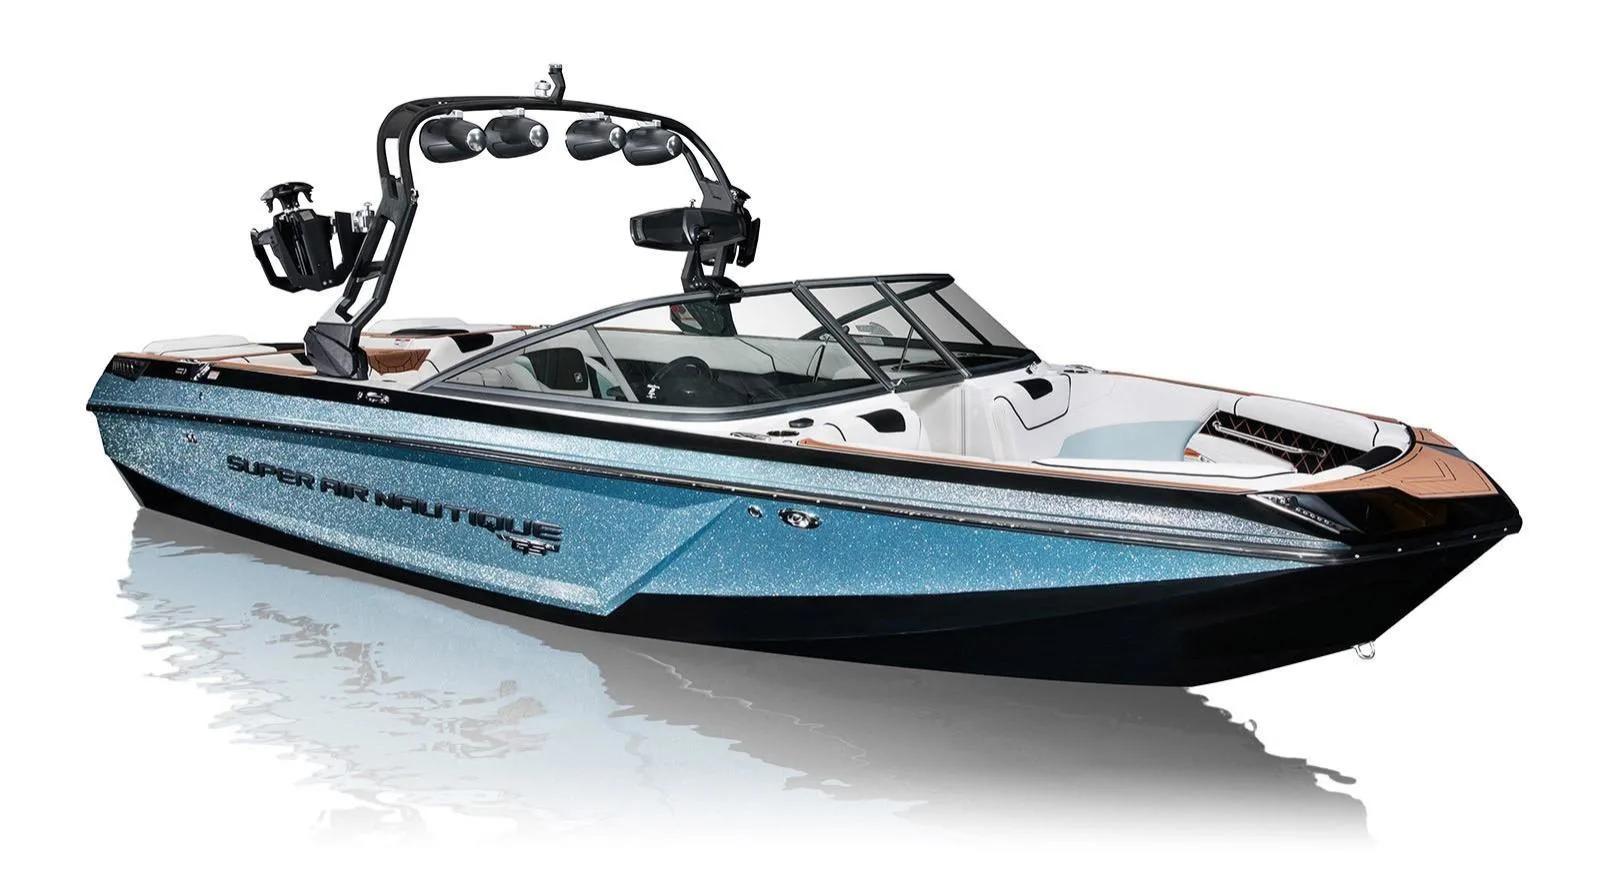 Nautique Rc Boat: Nautique RC boats: powerful, versatile, and ready for any type of water.